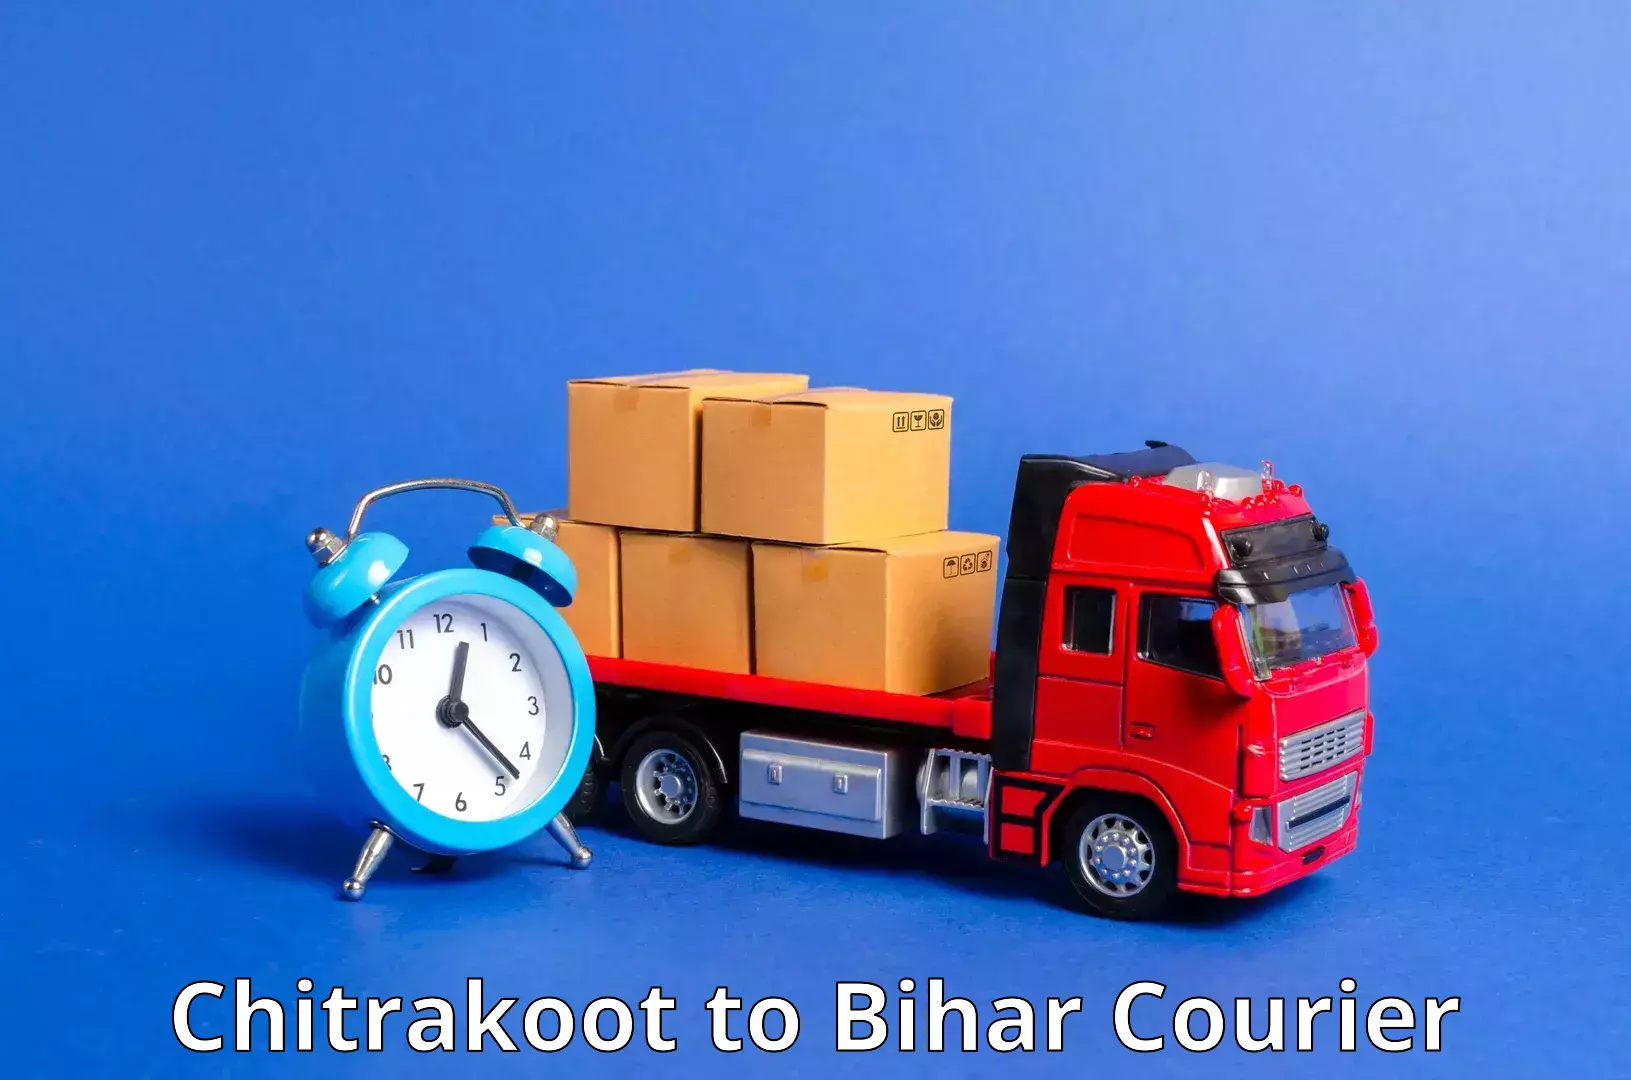 Courier service innovation Chitrakoot to Barachati